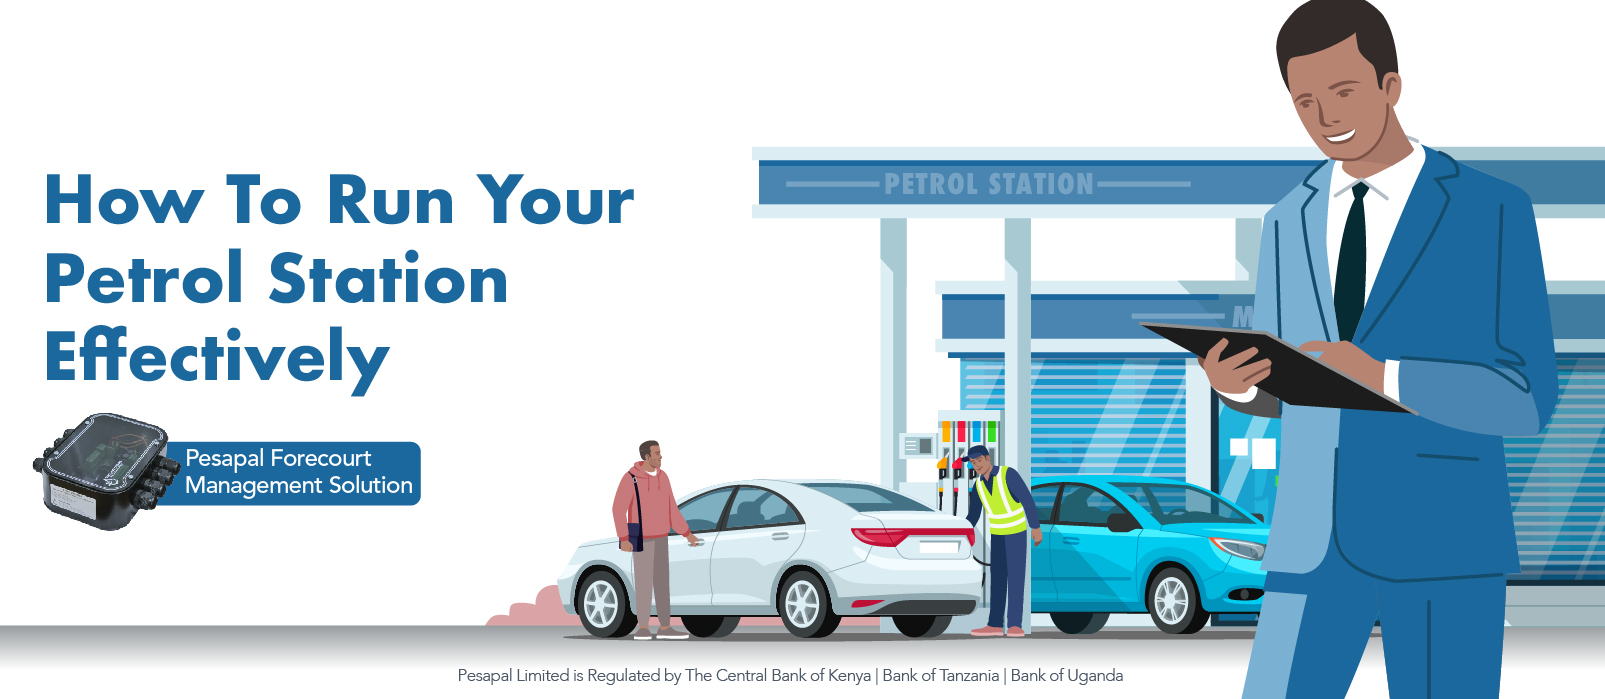 How To Run Petrol Station Effectively With The Pesapal Forecourt Management Solution